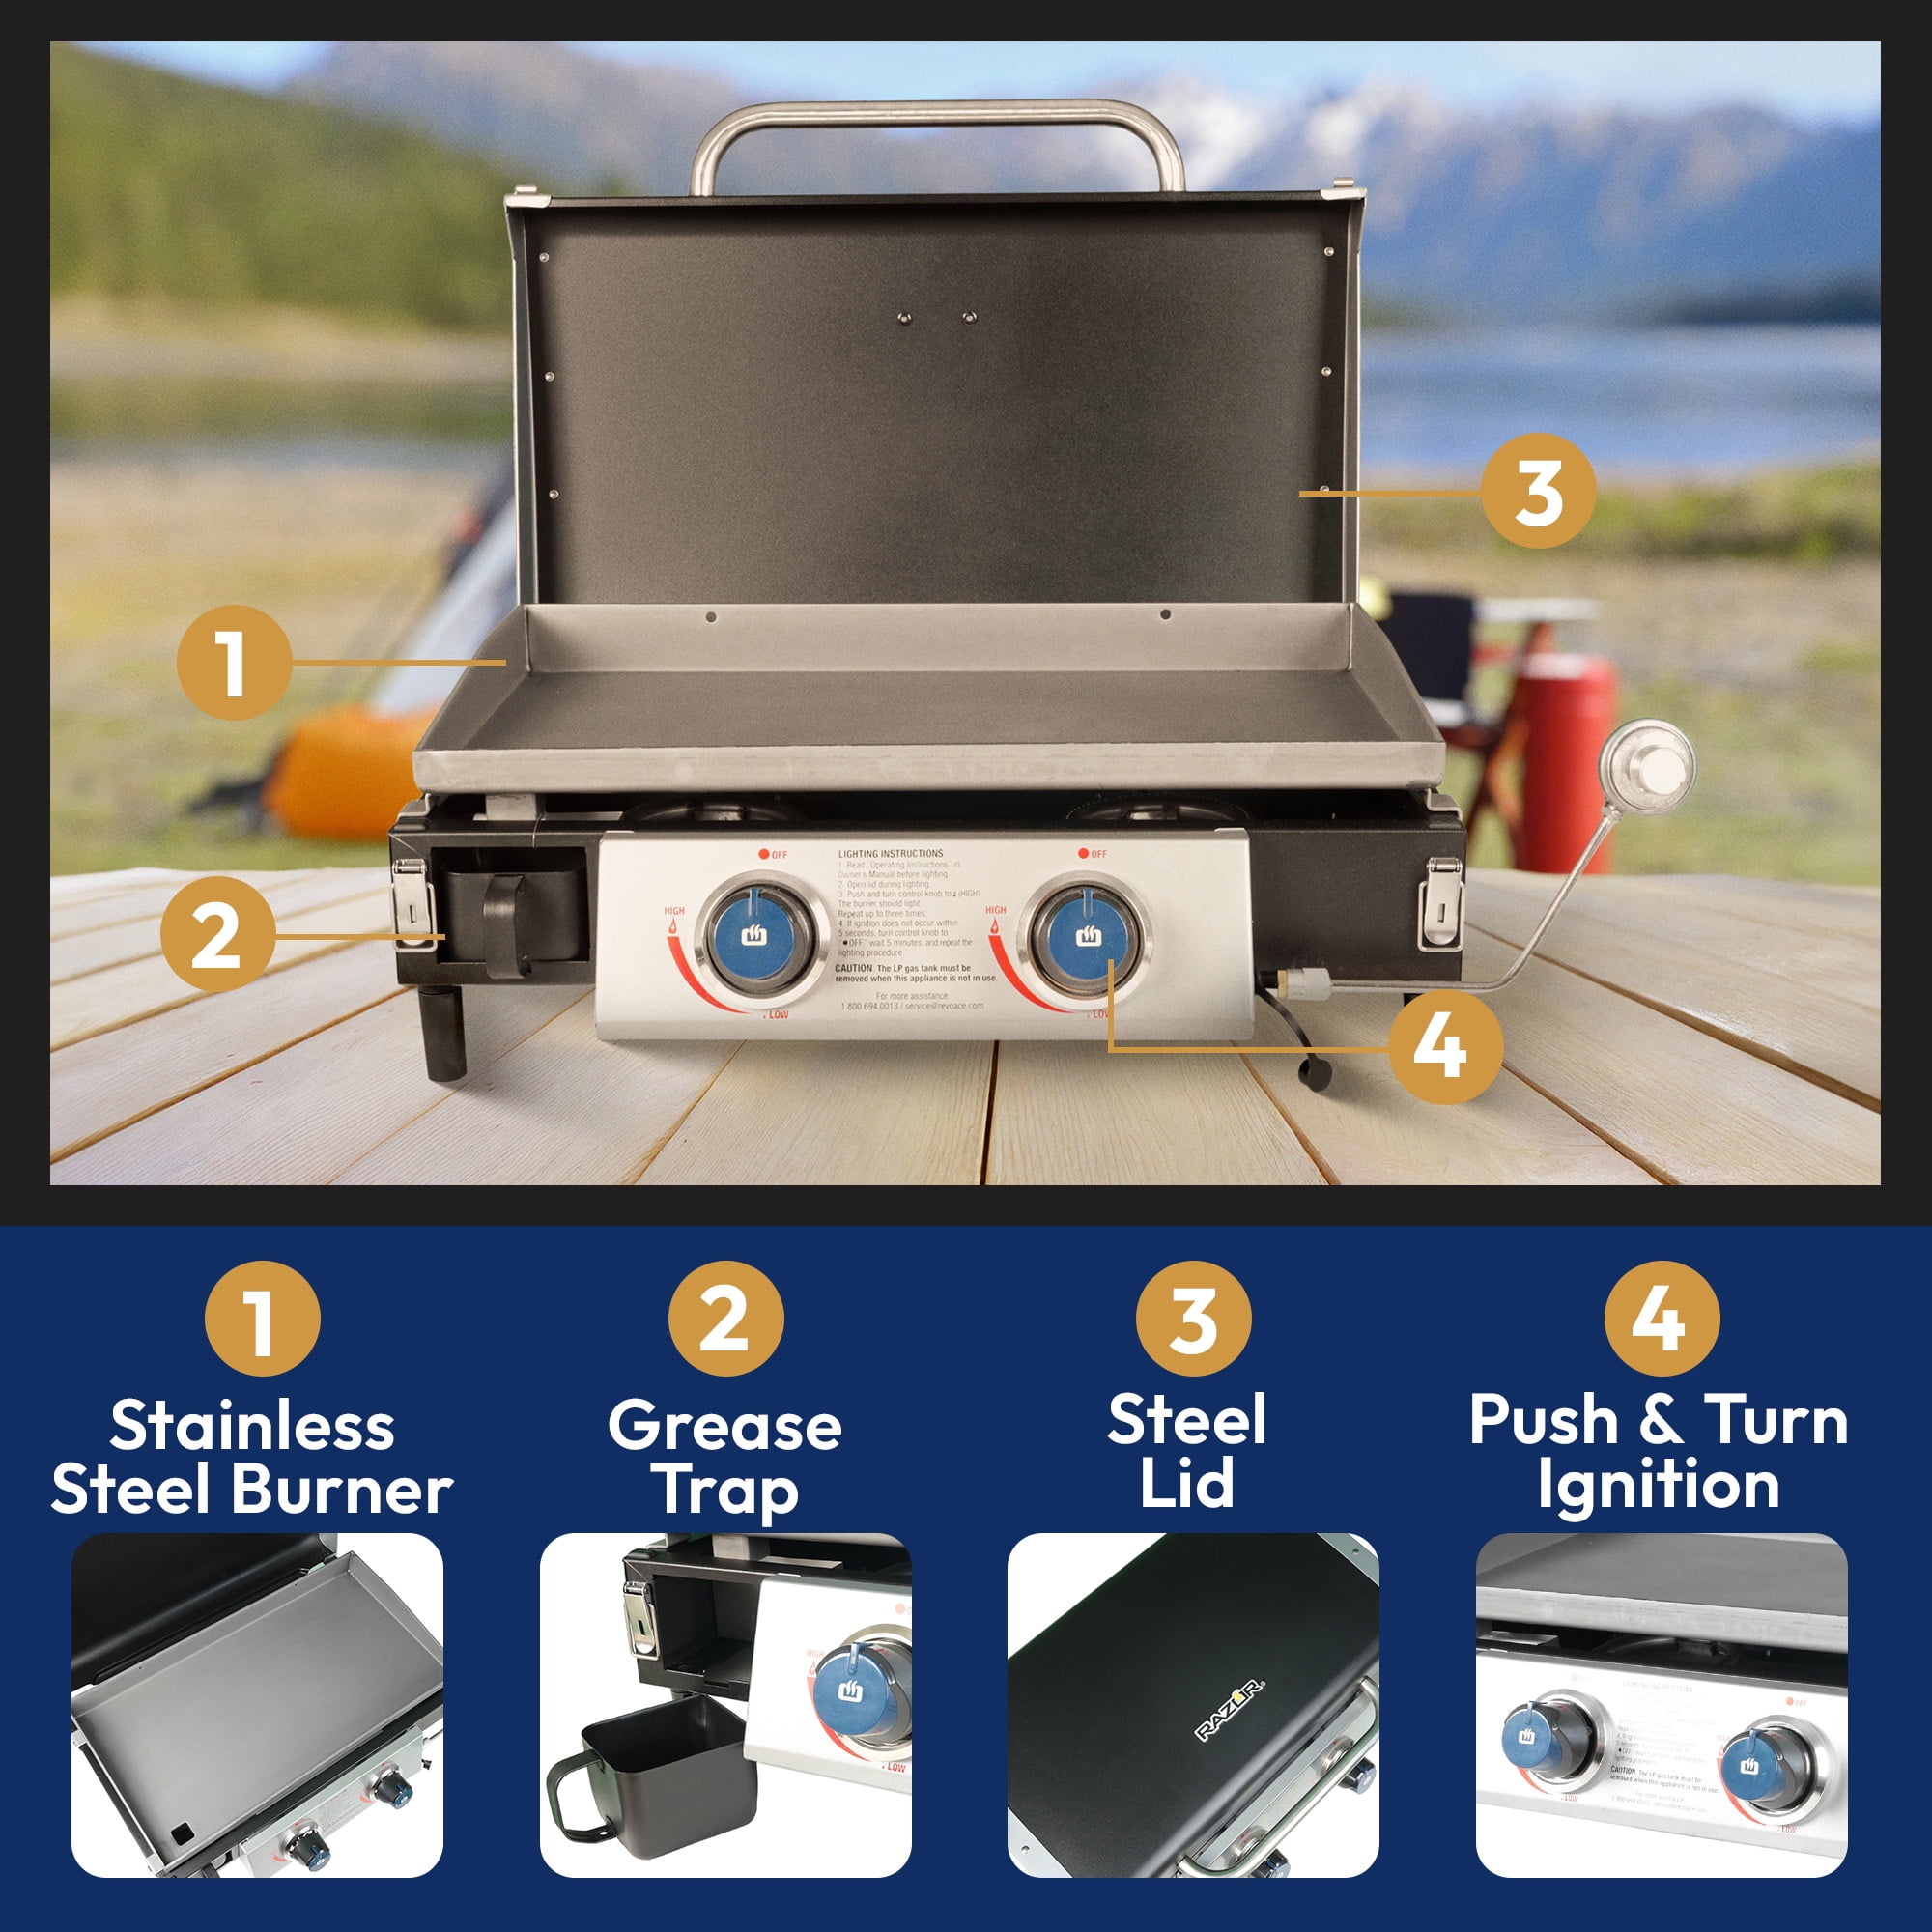 Razor 2-Burner Portable Propane Gas Griddle with Lid and Folding Cart